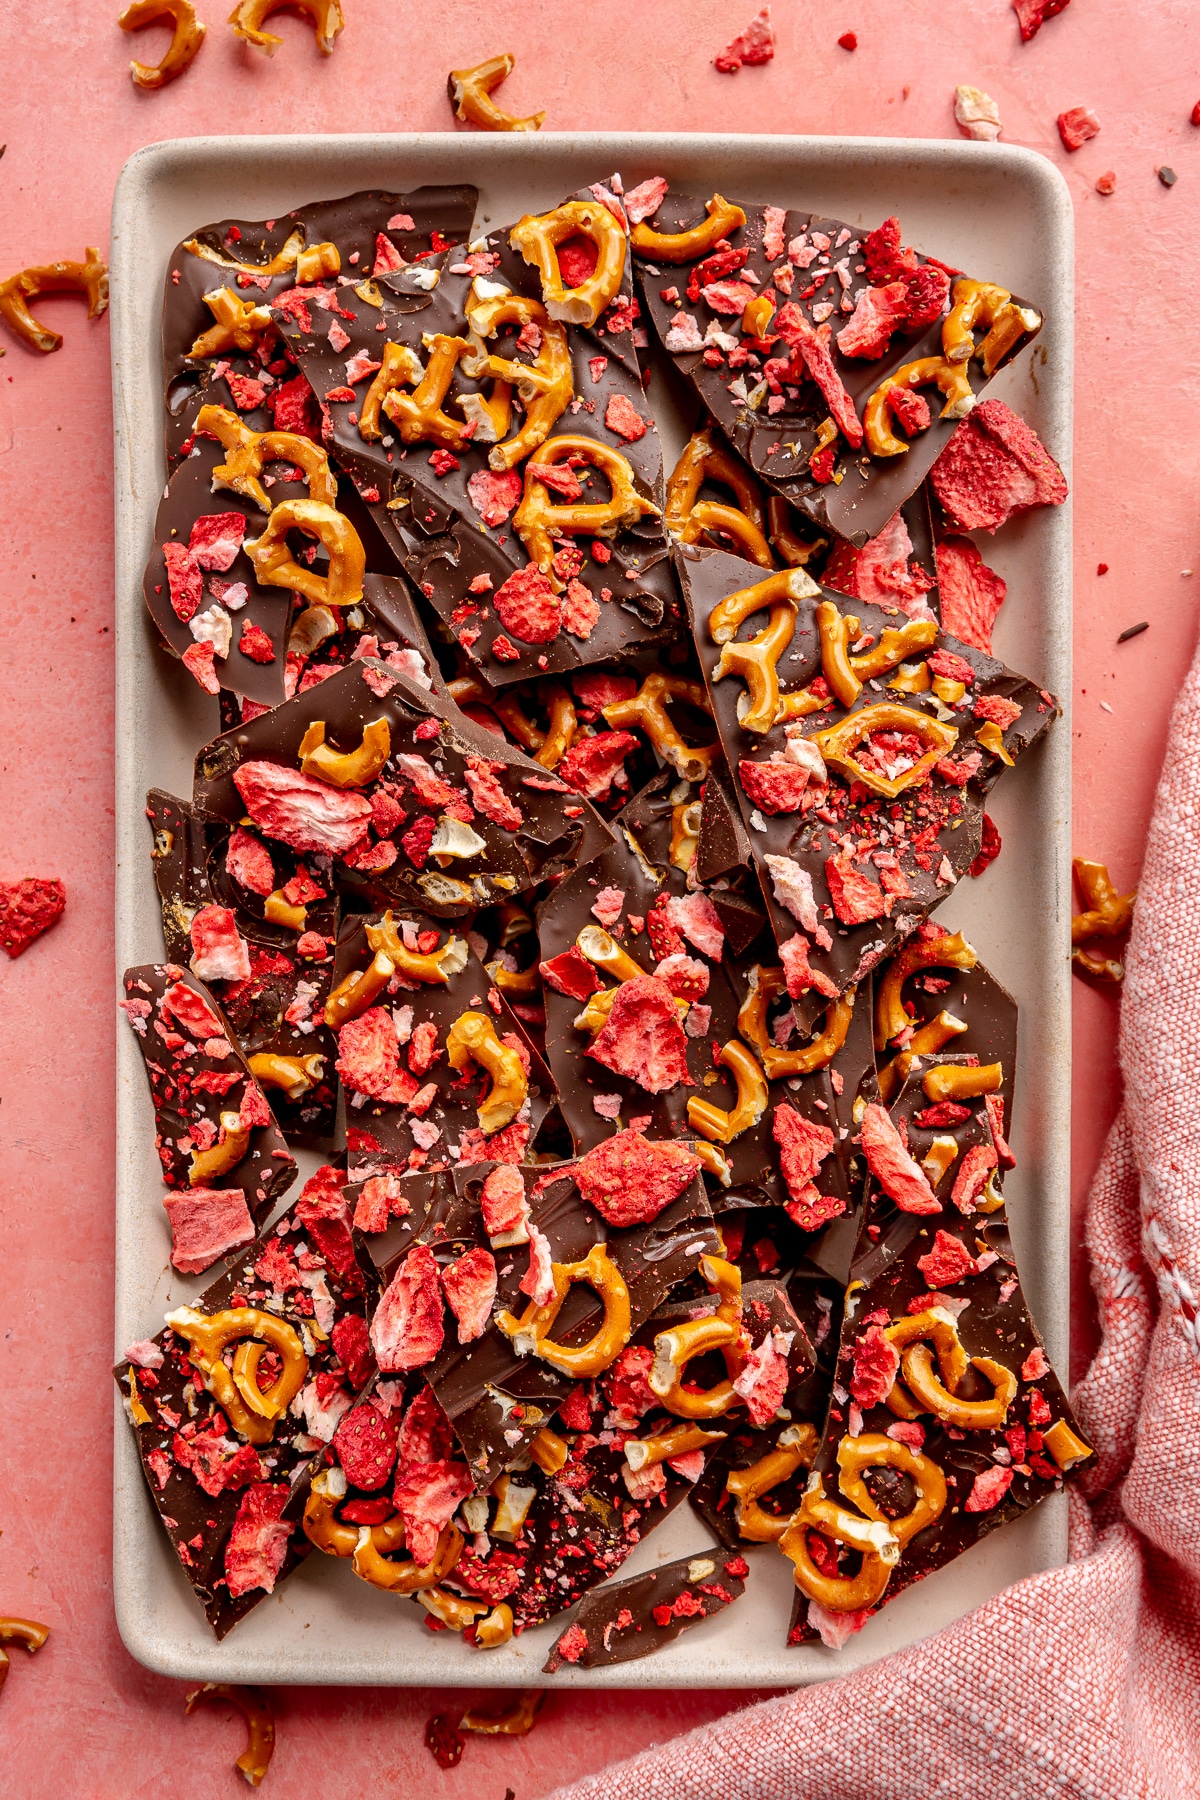 Dark chocolate bark with strawberries and pretzels sits on a light grey serving tray which sits on a light pink countertop. A pink dish cloth sits to the side.